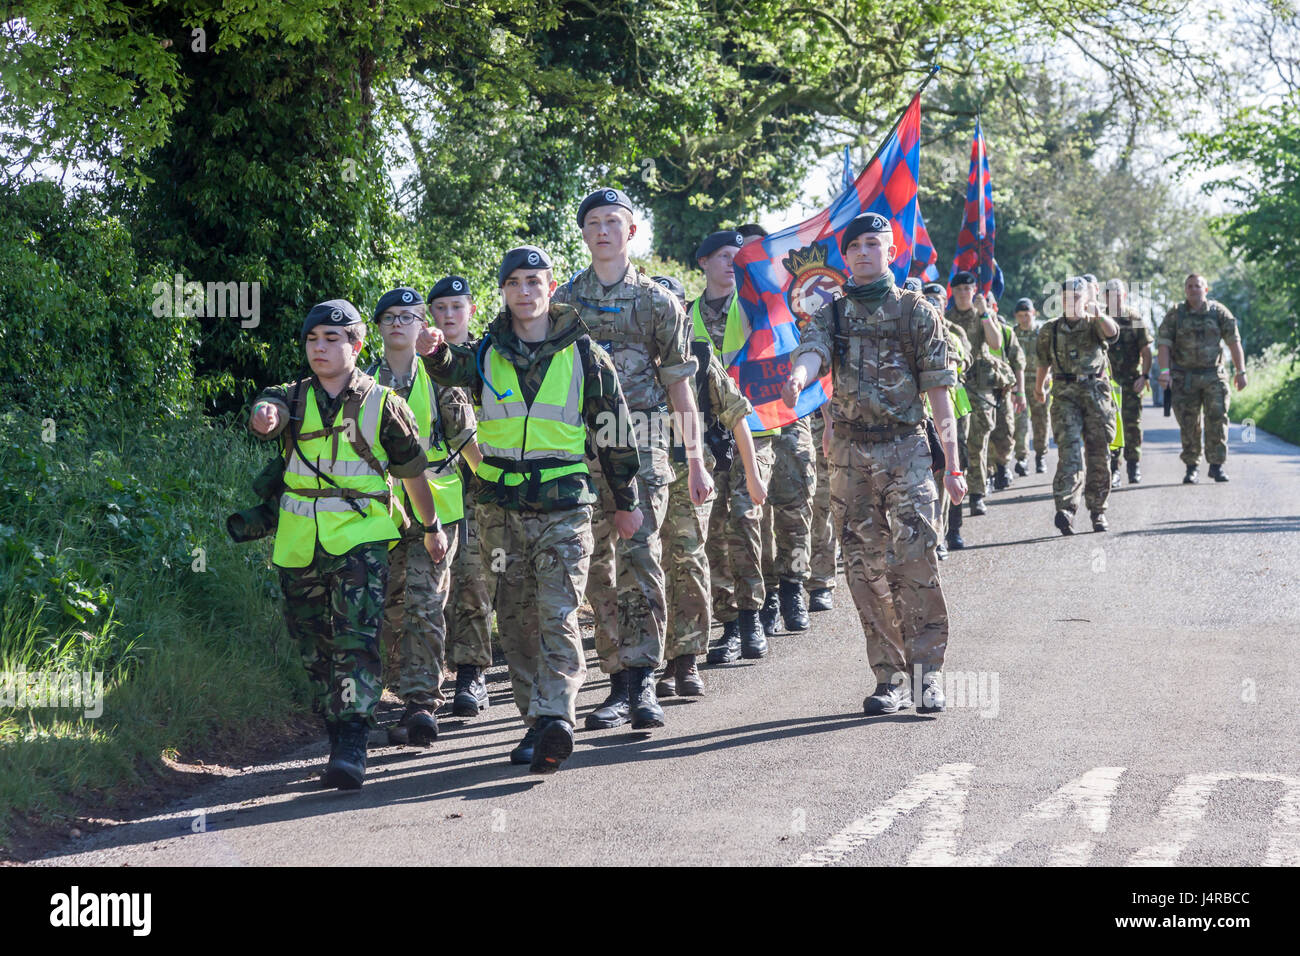 Wellingborough, Northamptonshire, U.K. 14th May 2017. The 38th International Waendel walk. Participant have travelled from as far afield as Australia and USA.  with groups and single people of all ages, after heavy overnight rain skies have cleared leaving a bright sunny day. Credit: Keith J Smith./Alamy Live News Stock Photo